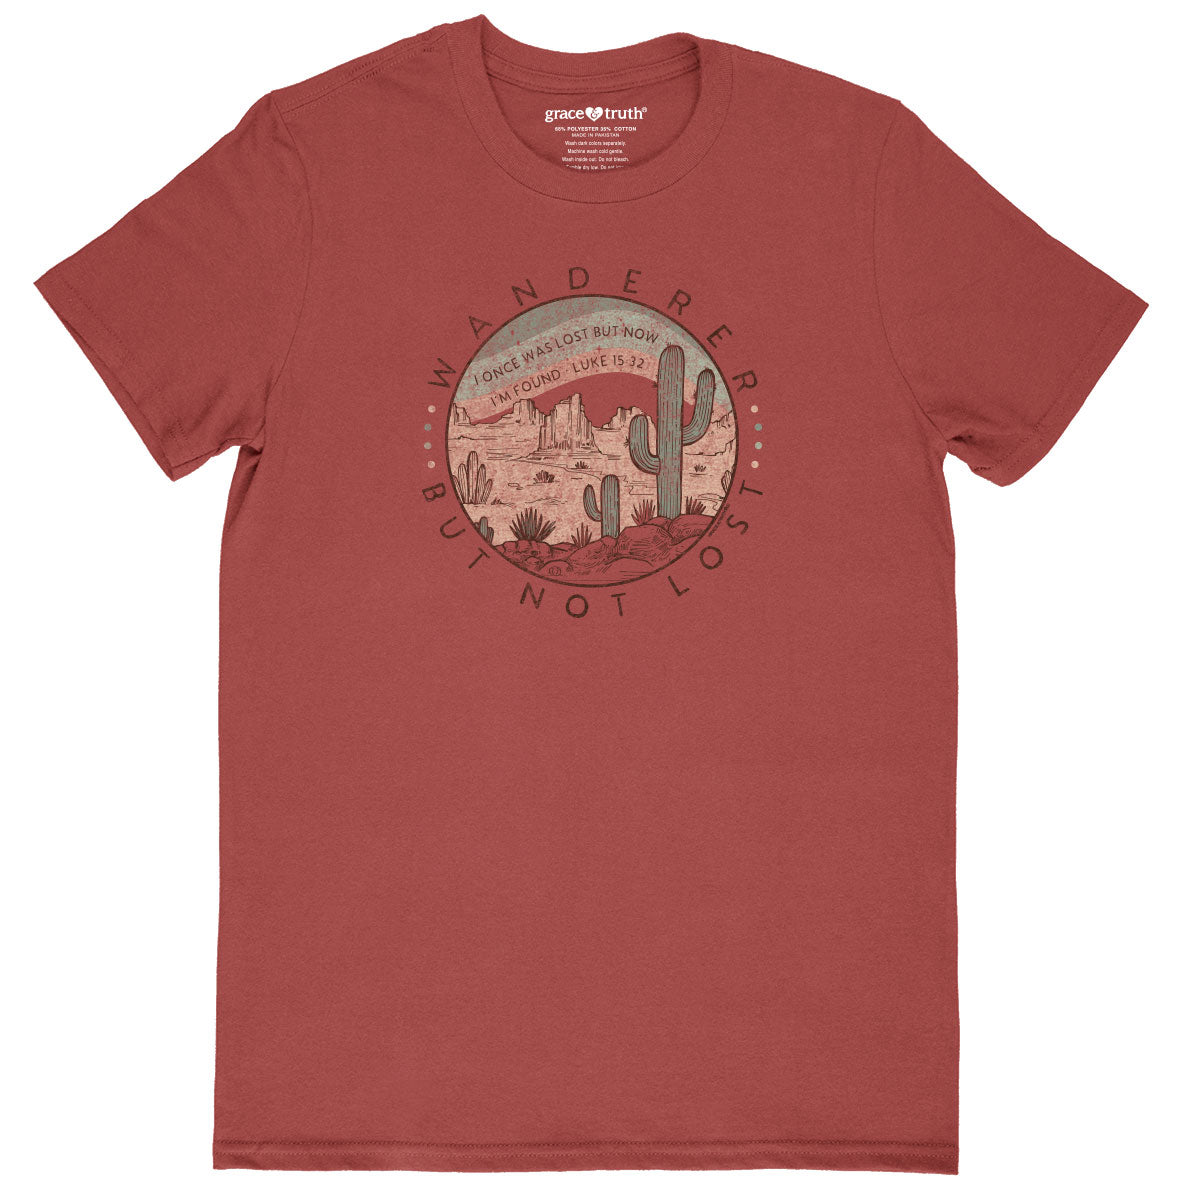 grace & truth Womens T-Shirt Wanderer Guided By Faith